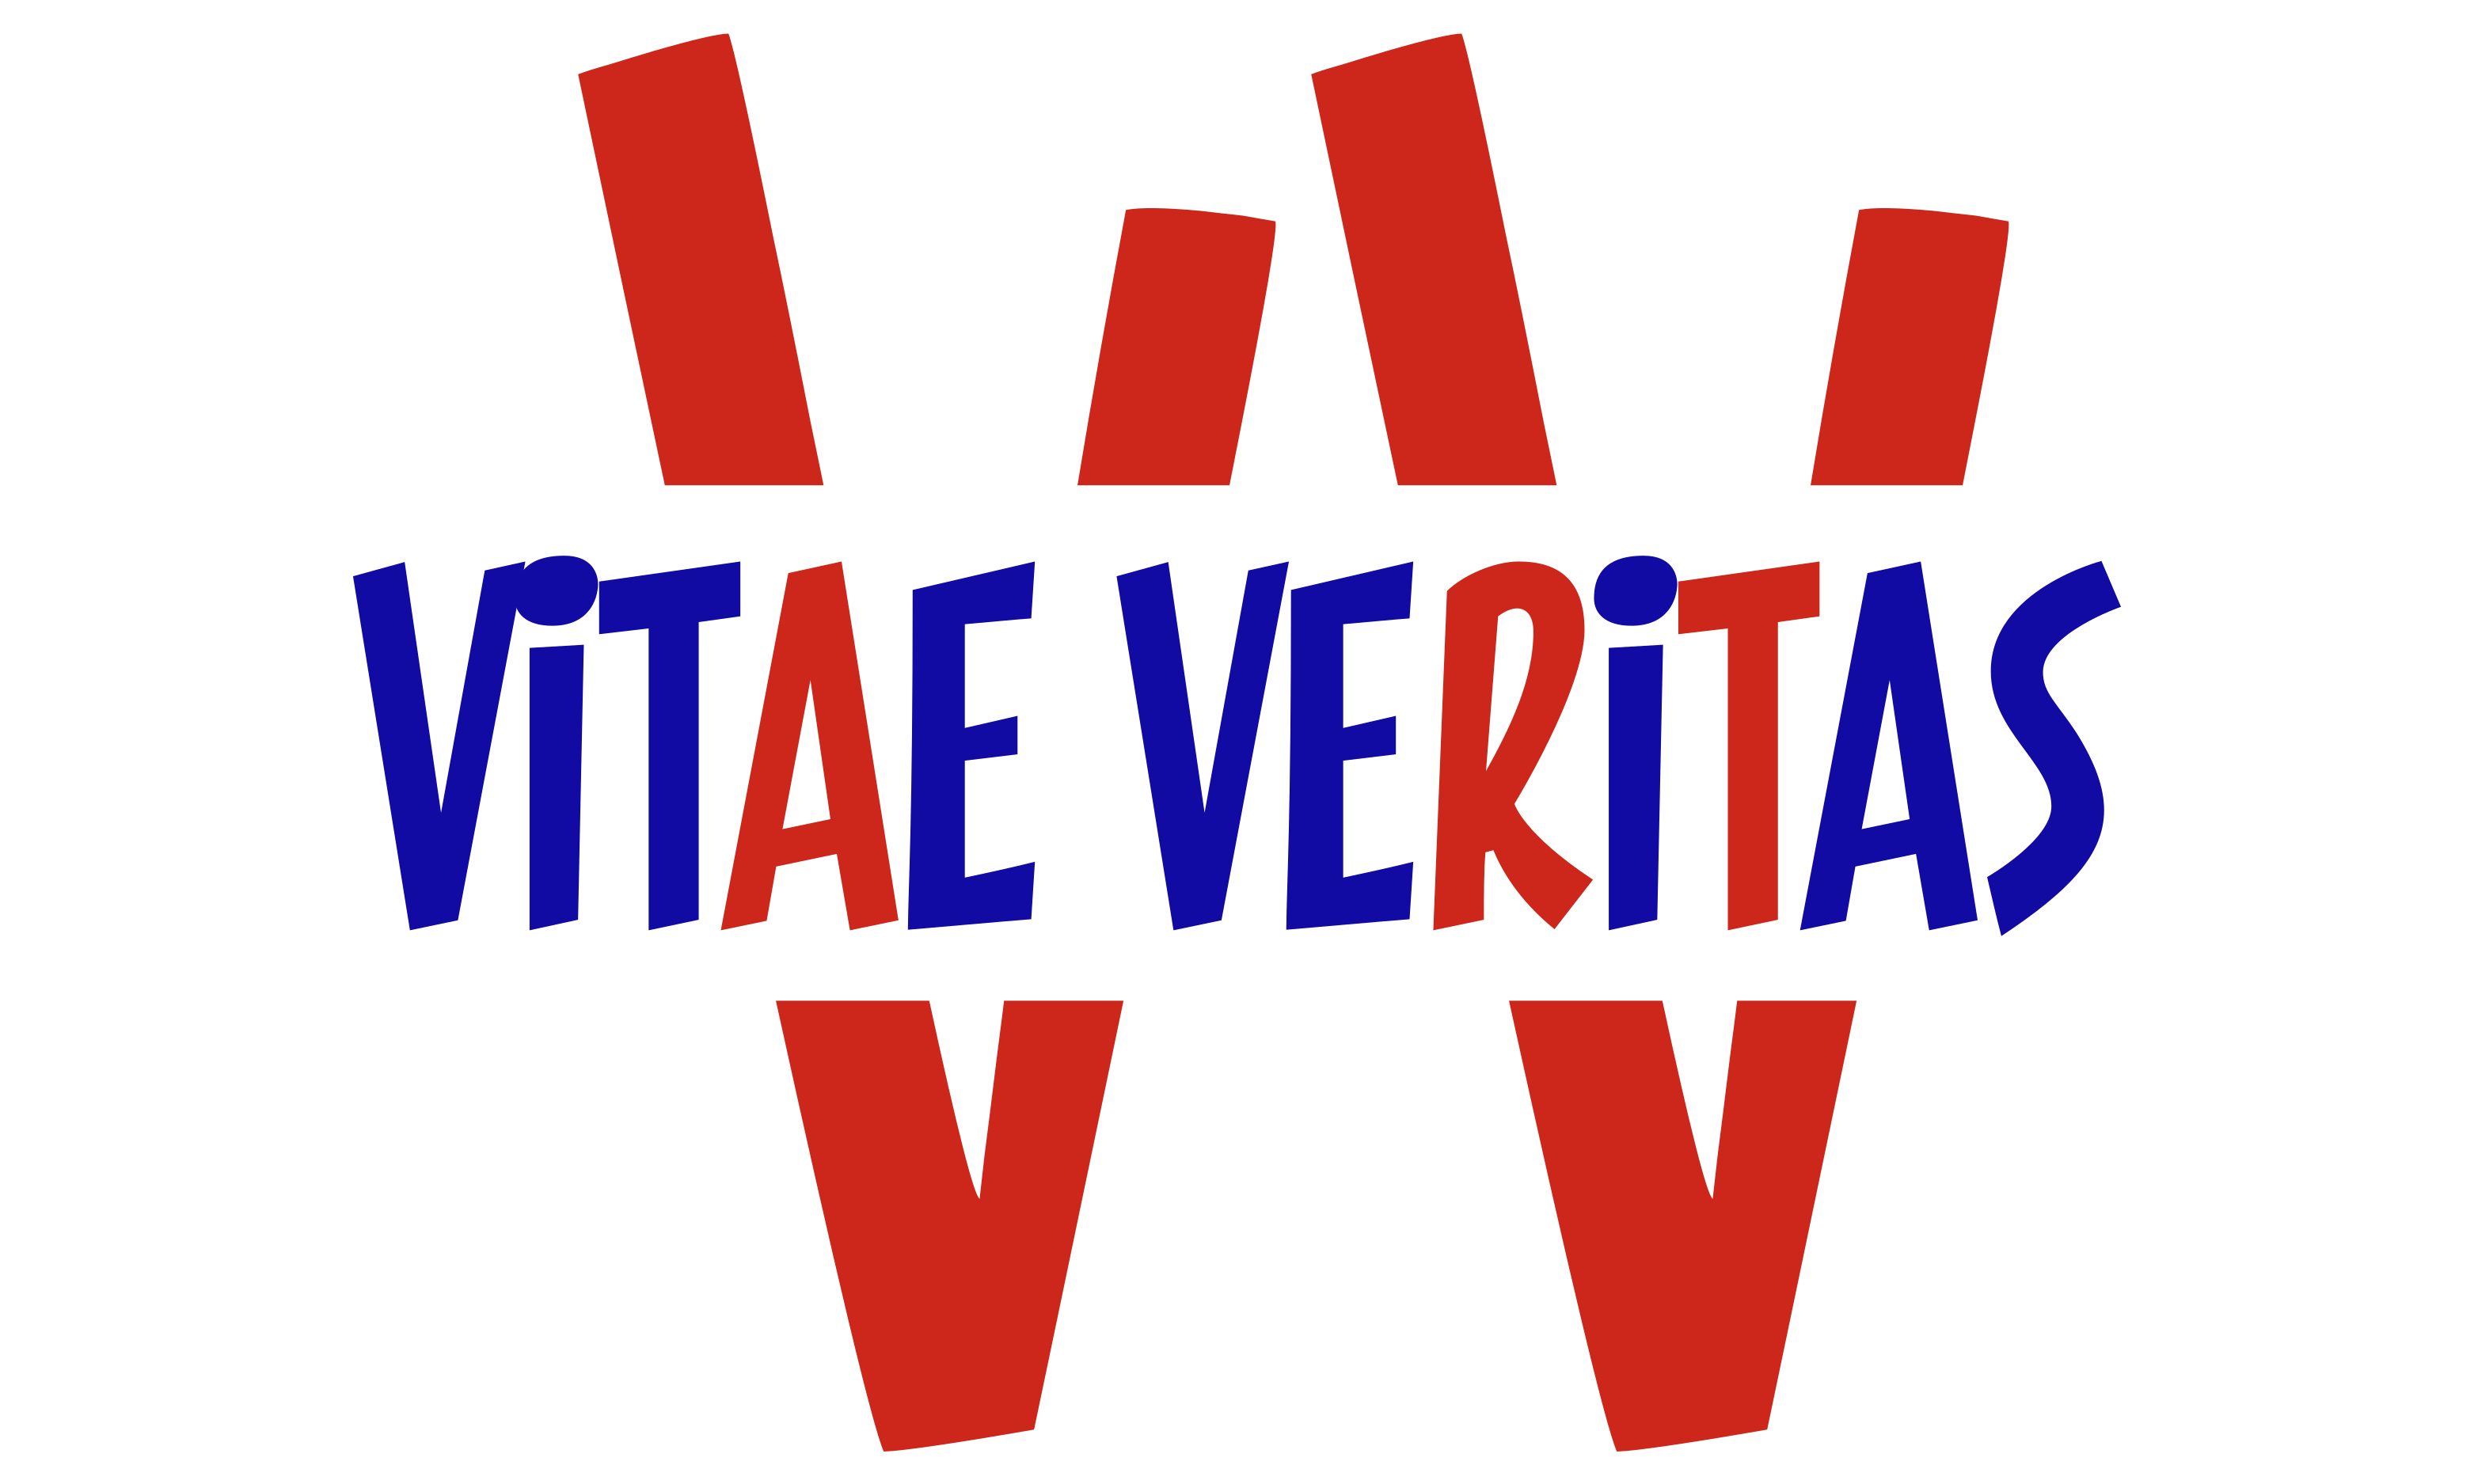 Vitae Veritas is in caps in dark blue, with the A and R and T in red, spelling 